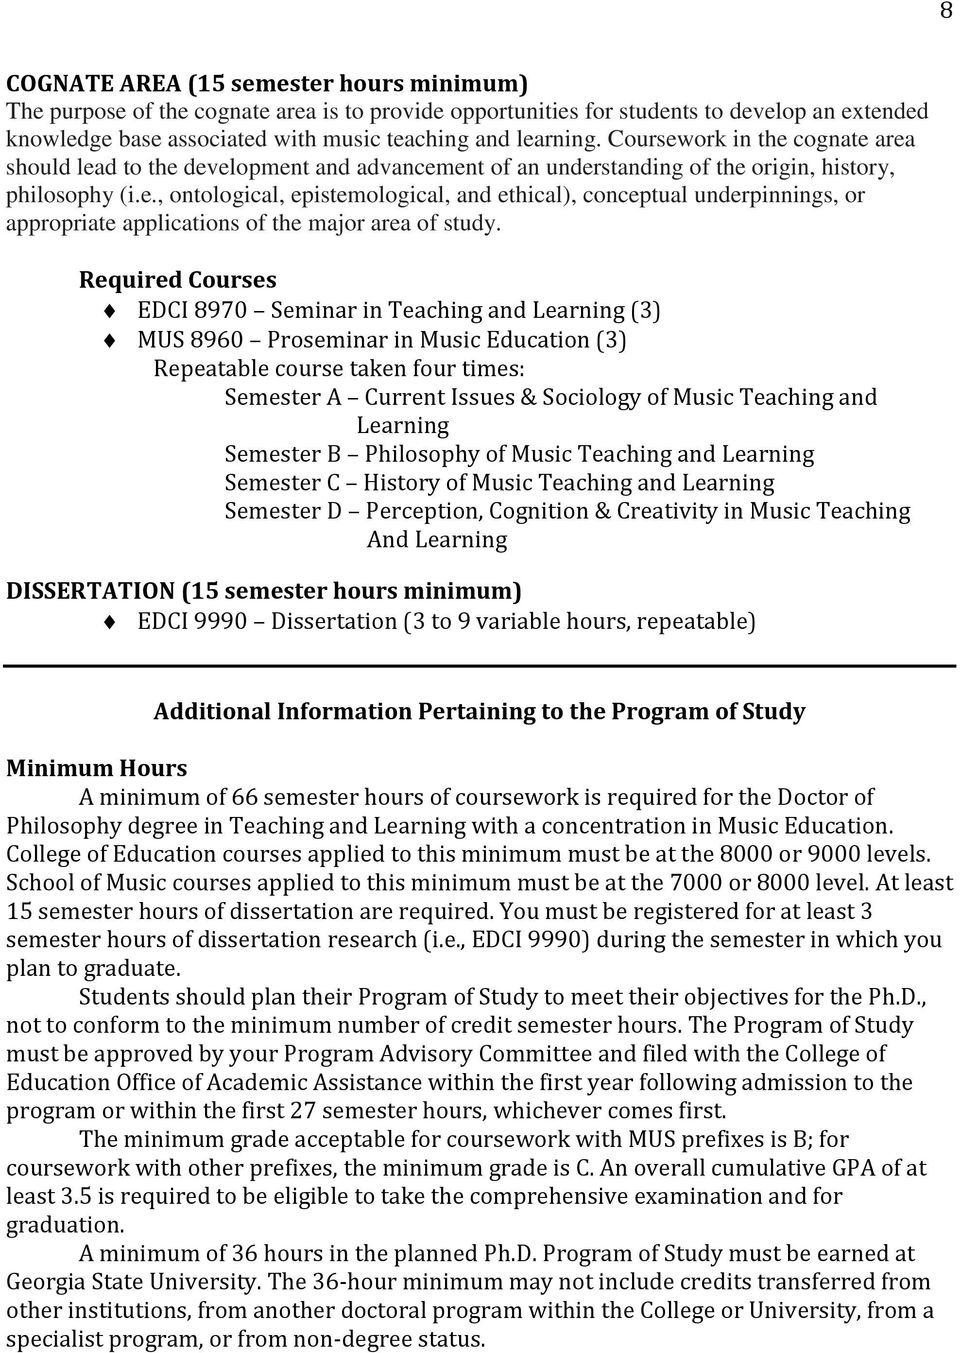 Required Courses EDCI 8970 Seminar in Teaching and Learning (3) MUS 8960 Proseminar in Music Education (3) Repeatable course taken four times: Semester A Current Issues & Sociology of Music Teaching